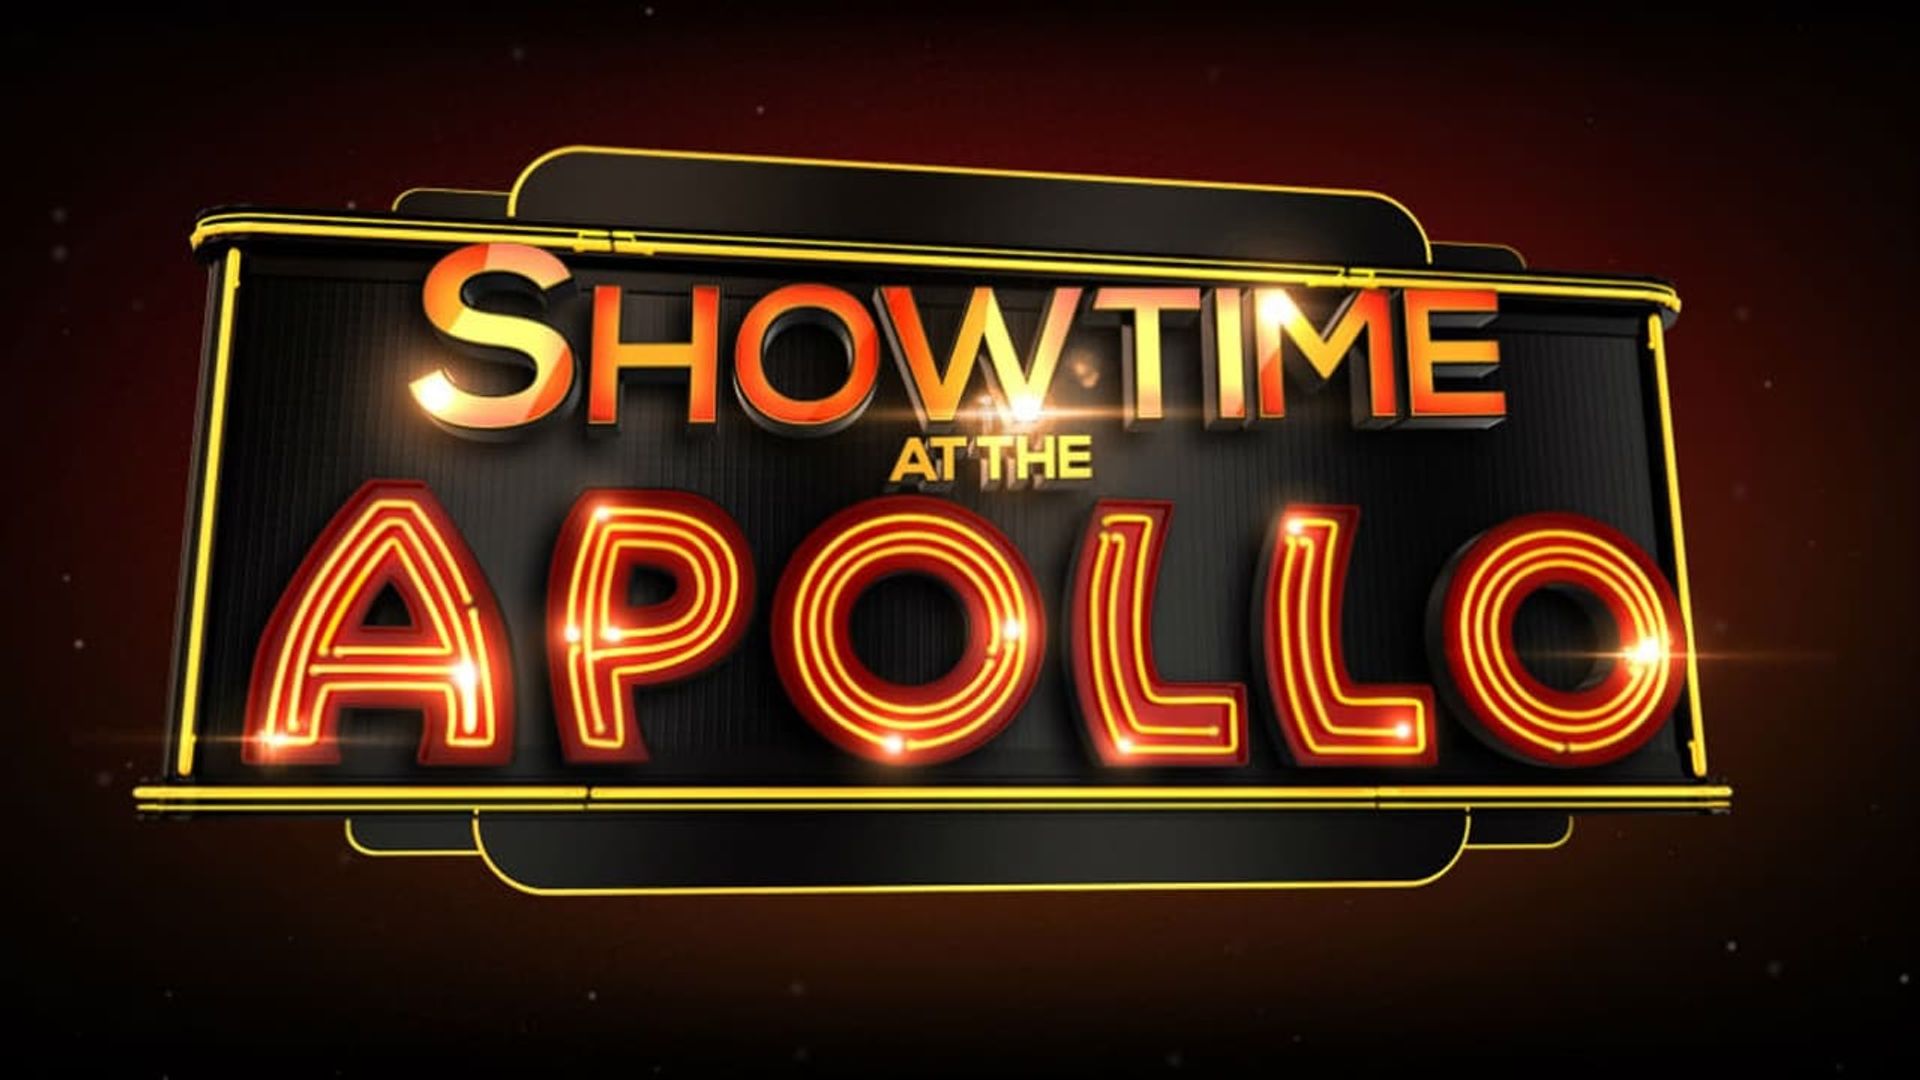 It's Showtime at the Apollo background